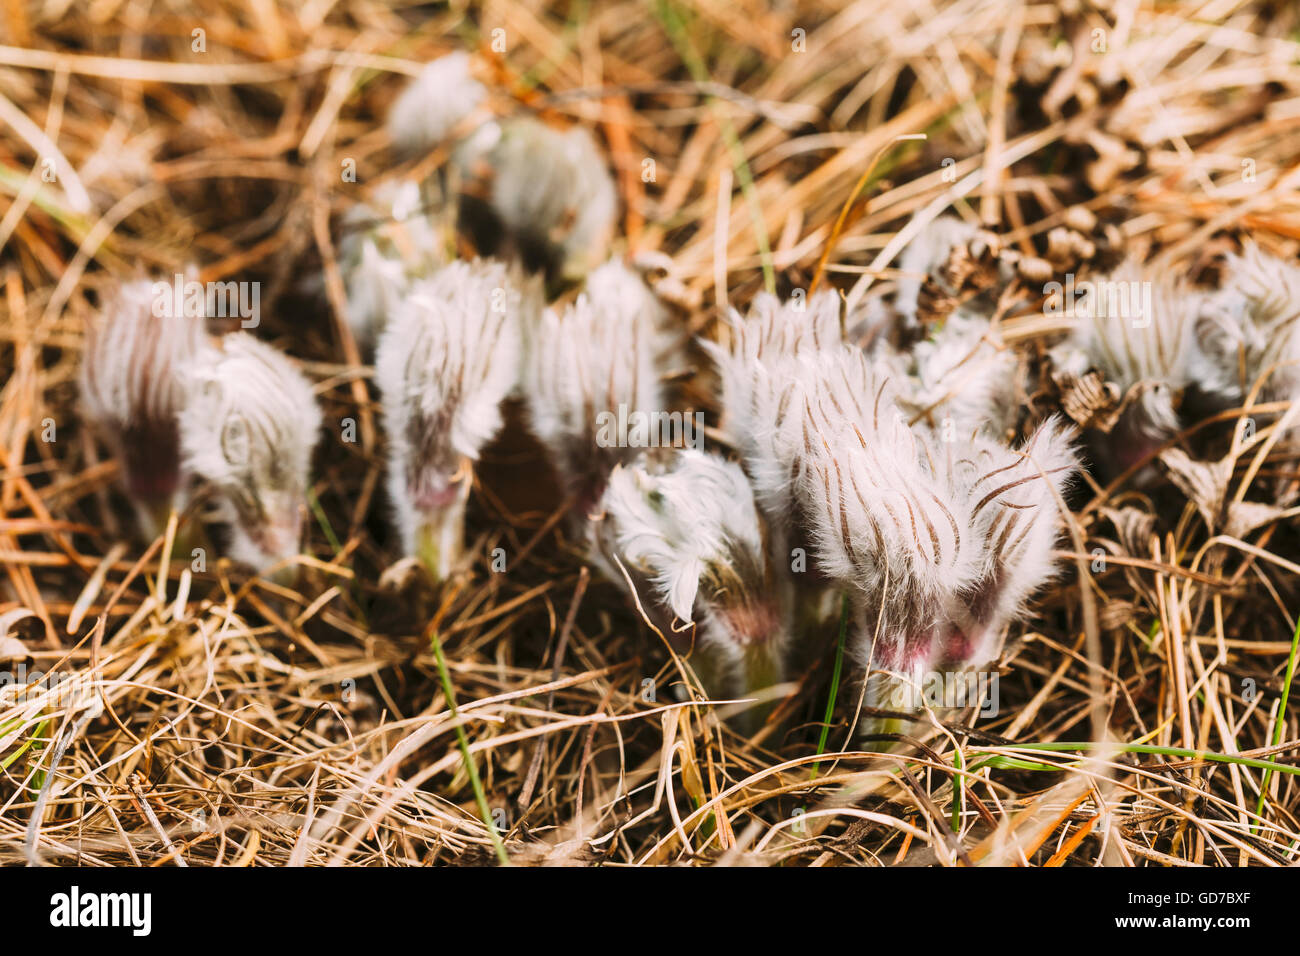 Wild Spring Forest Flowers Pulsatilla Patens. Flowering Plant In Family Ranunculaceae, Native To Europe, Russia, Mongolia, China Stock Photo